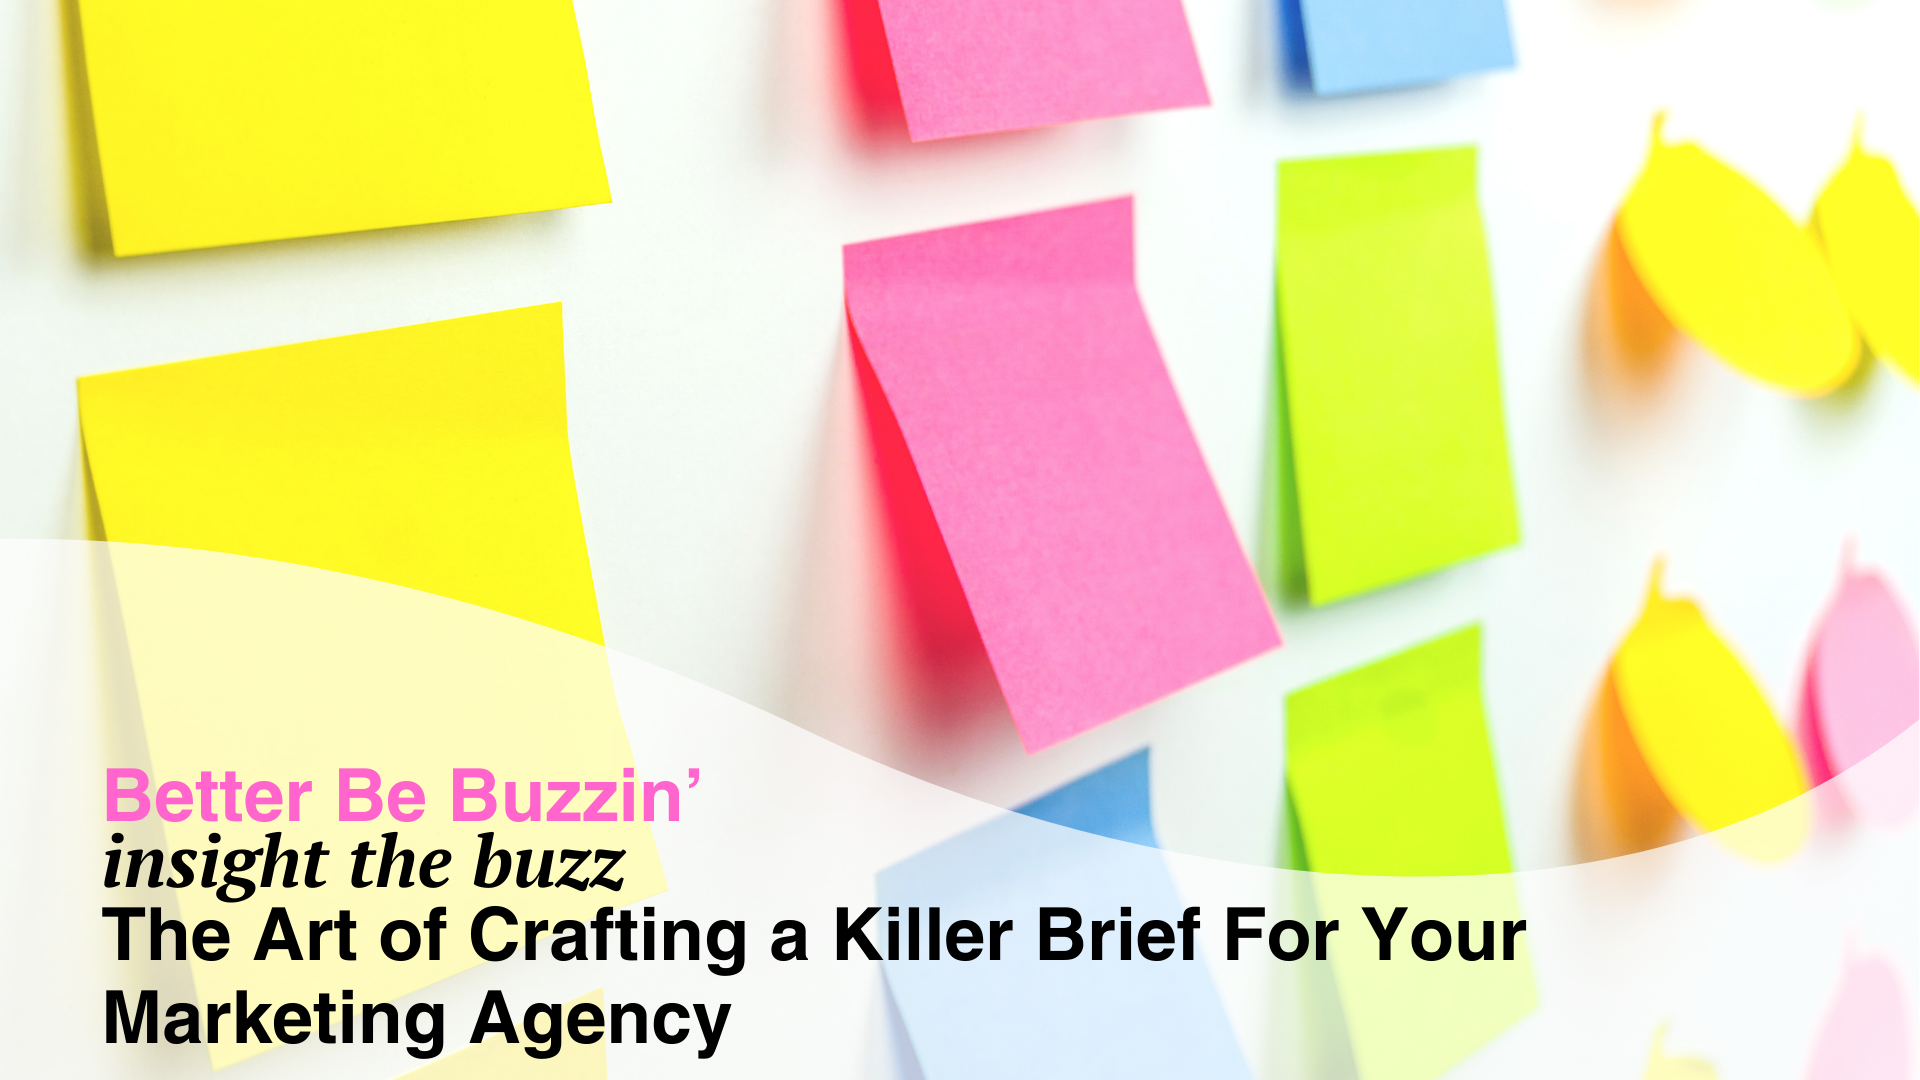 better be buzzin insight the buzz art of crafting killer brief for your marketing agency